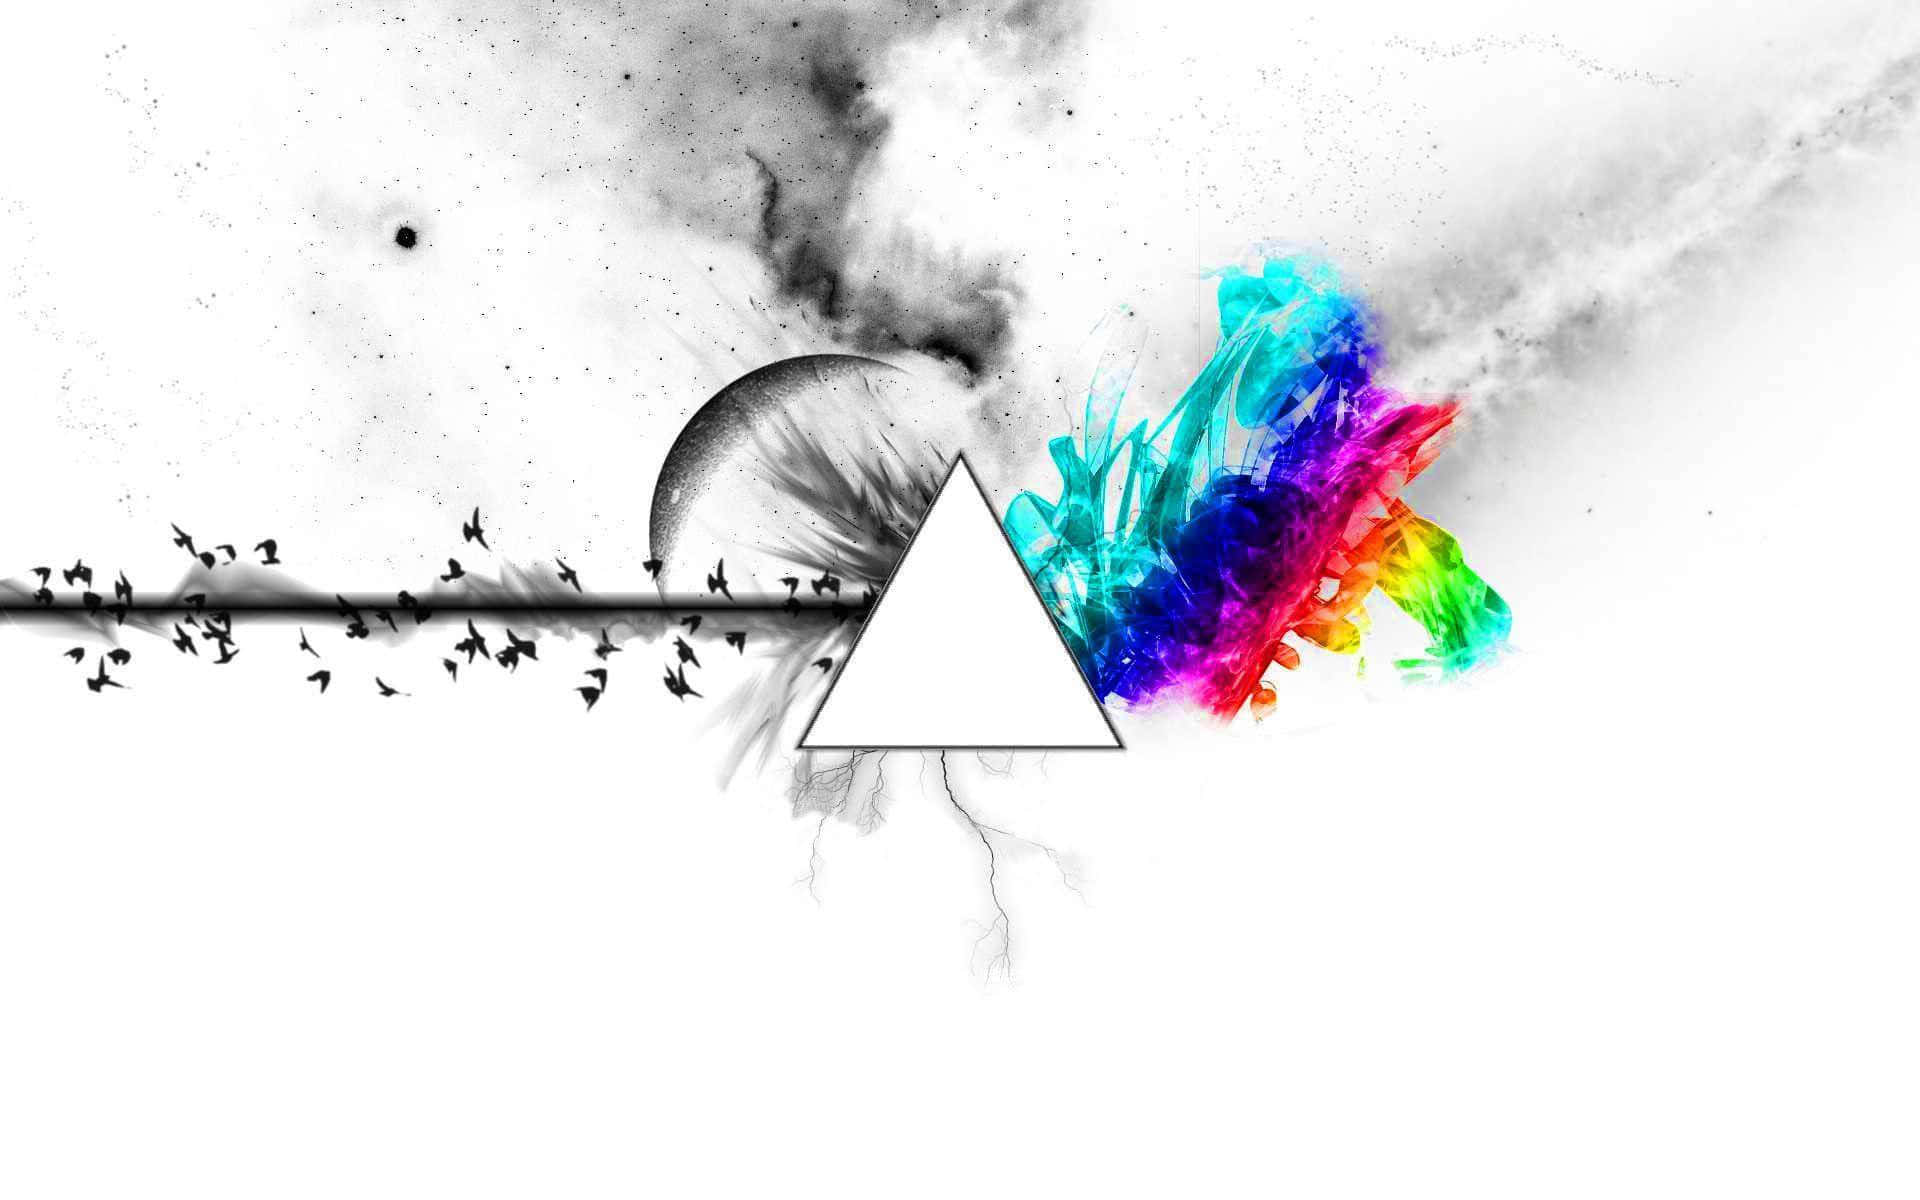 Immerse yourself in Pink Floyd’s iconic "Dark Side of the Moon" album Wallpaper